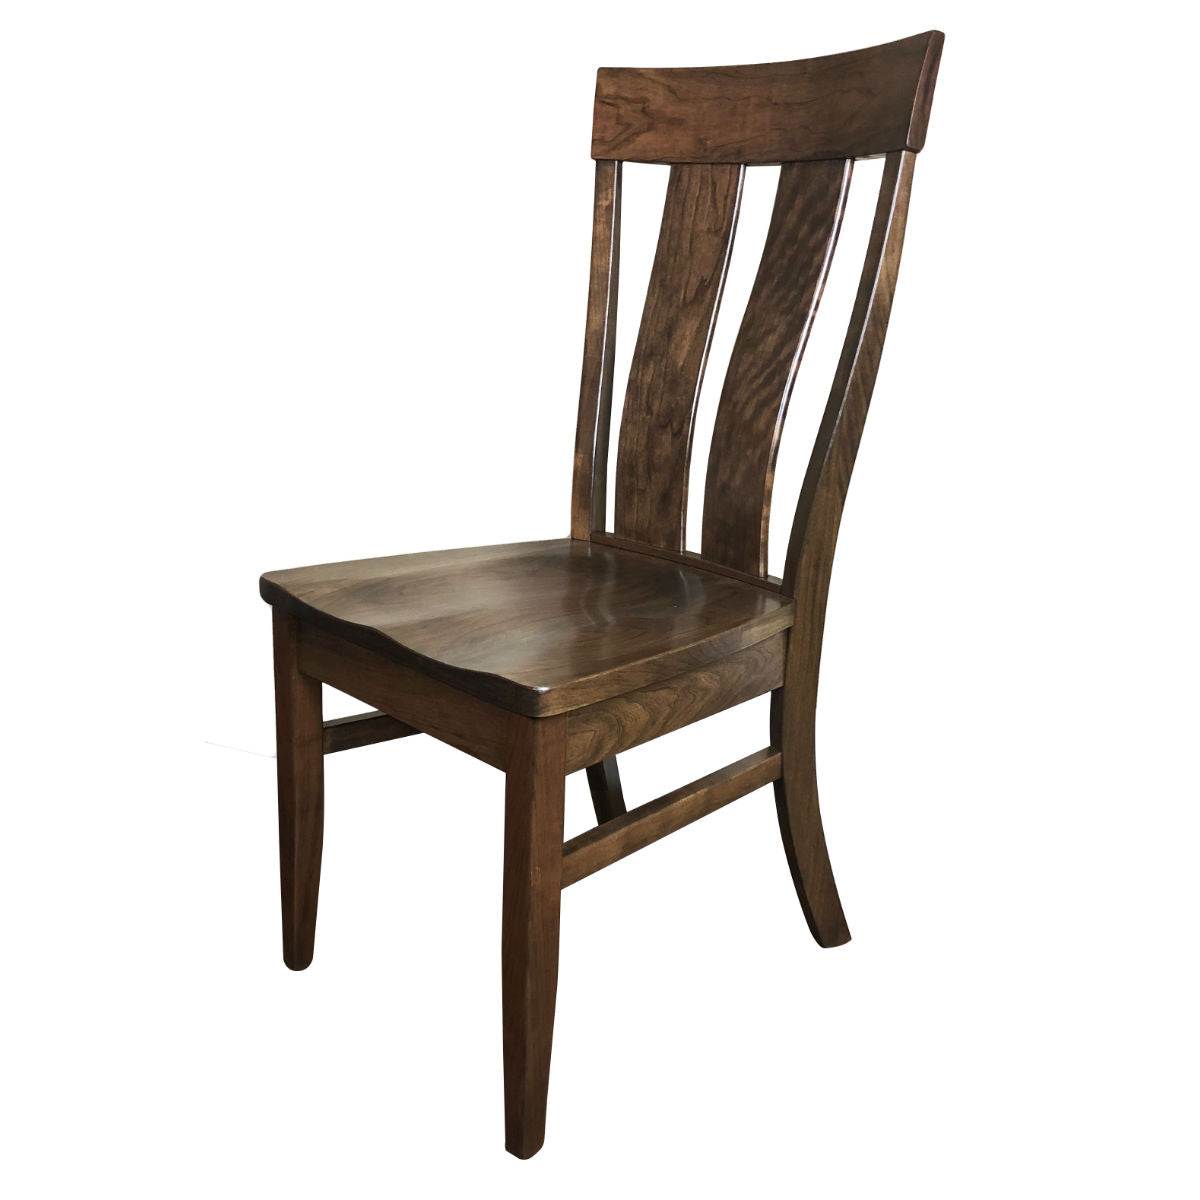 Sap Cherry cappuccino dining chair